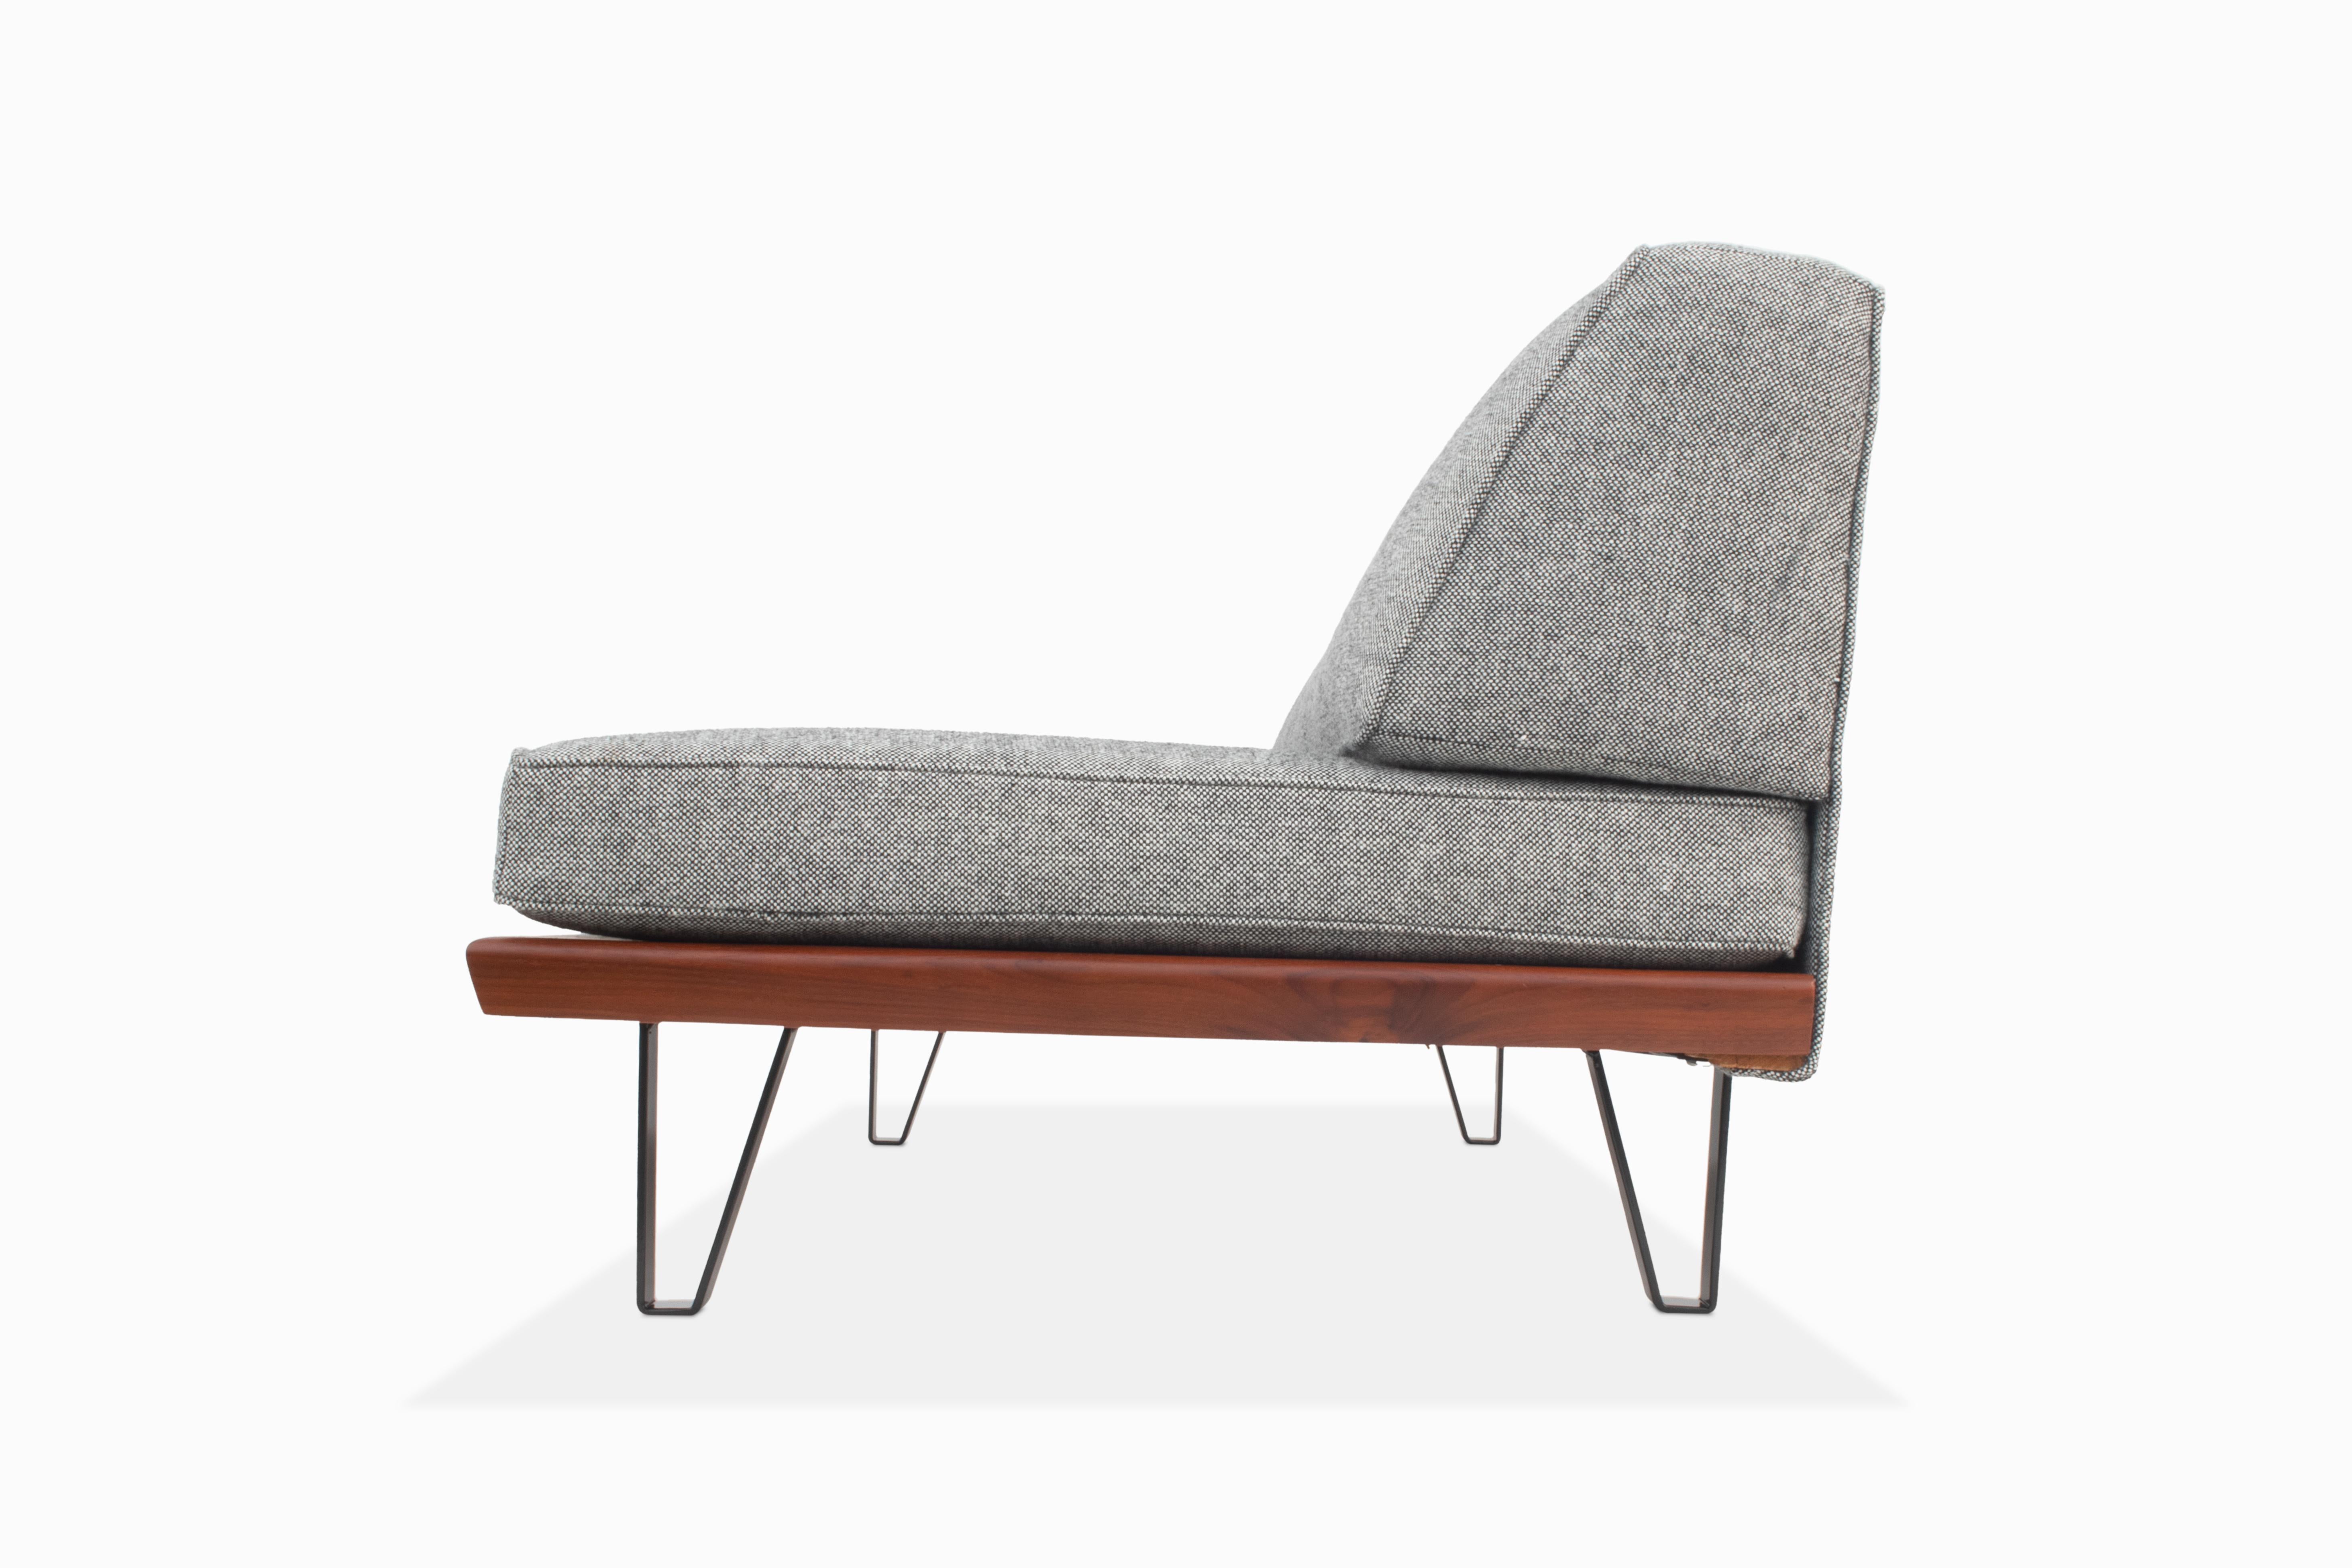 Wool Vintage Mid Century Daybed by Mel Bogart for Felmore Associates